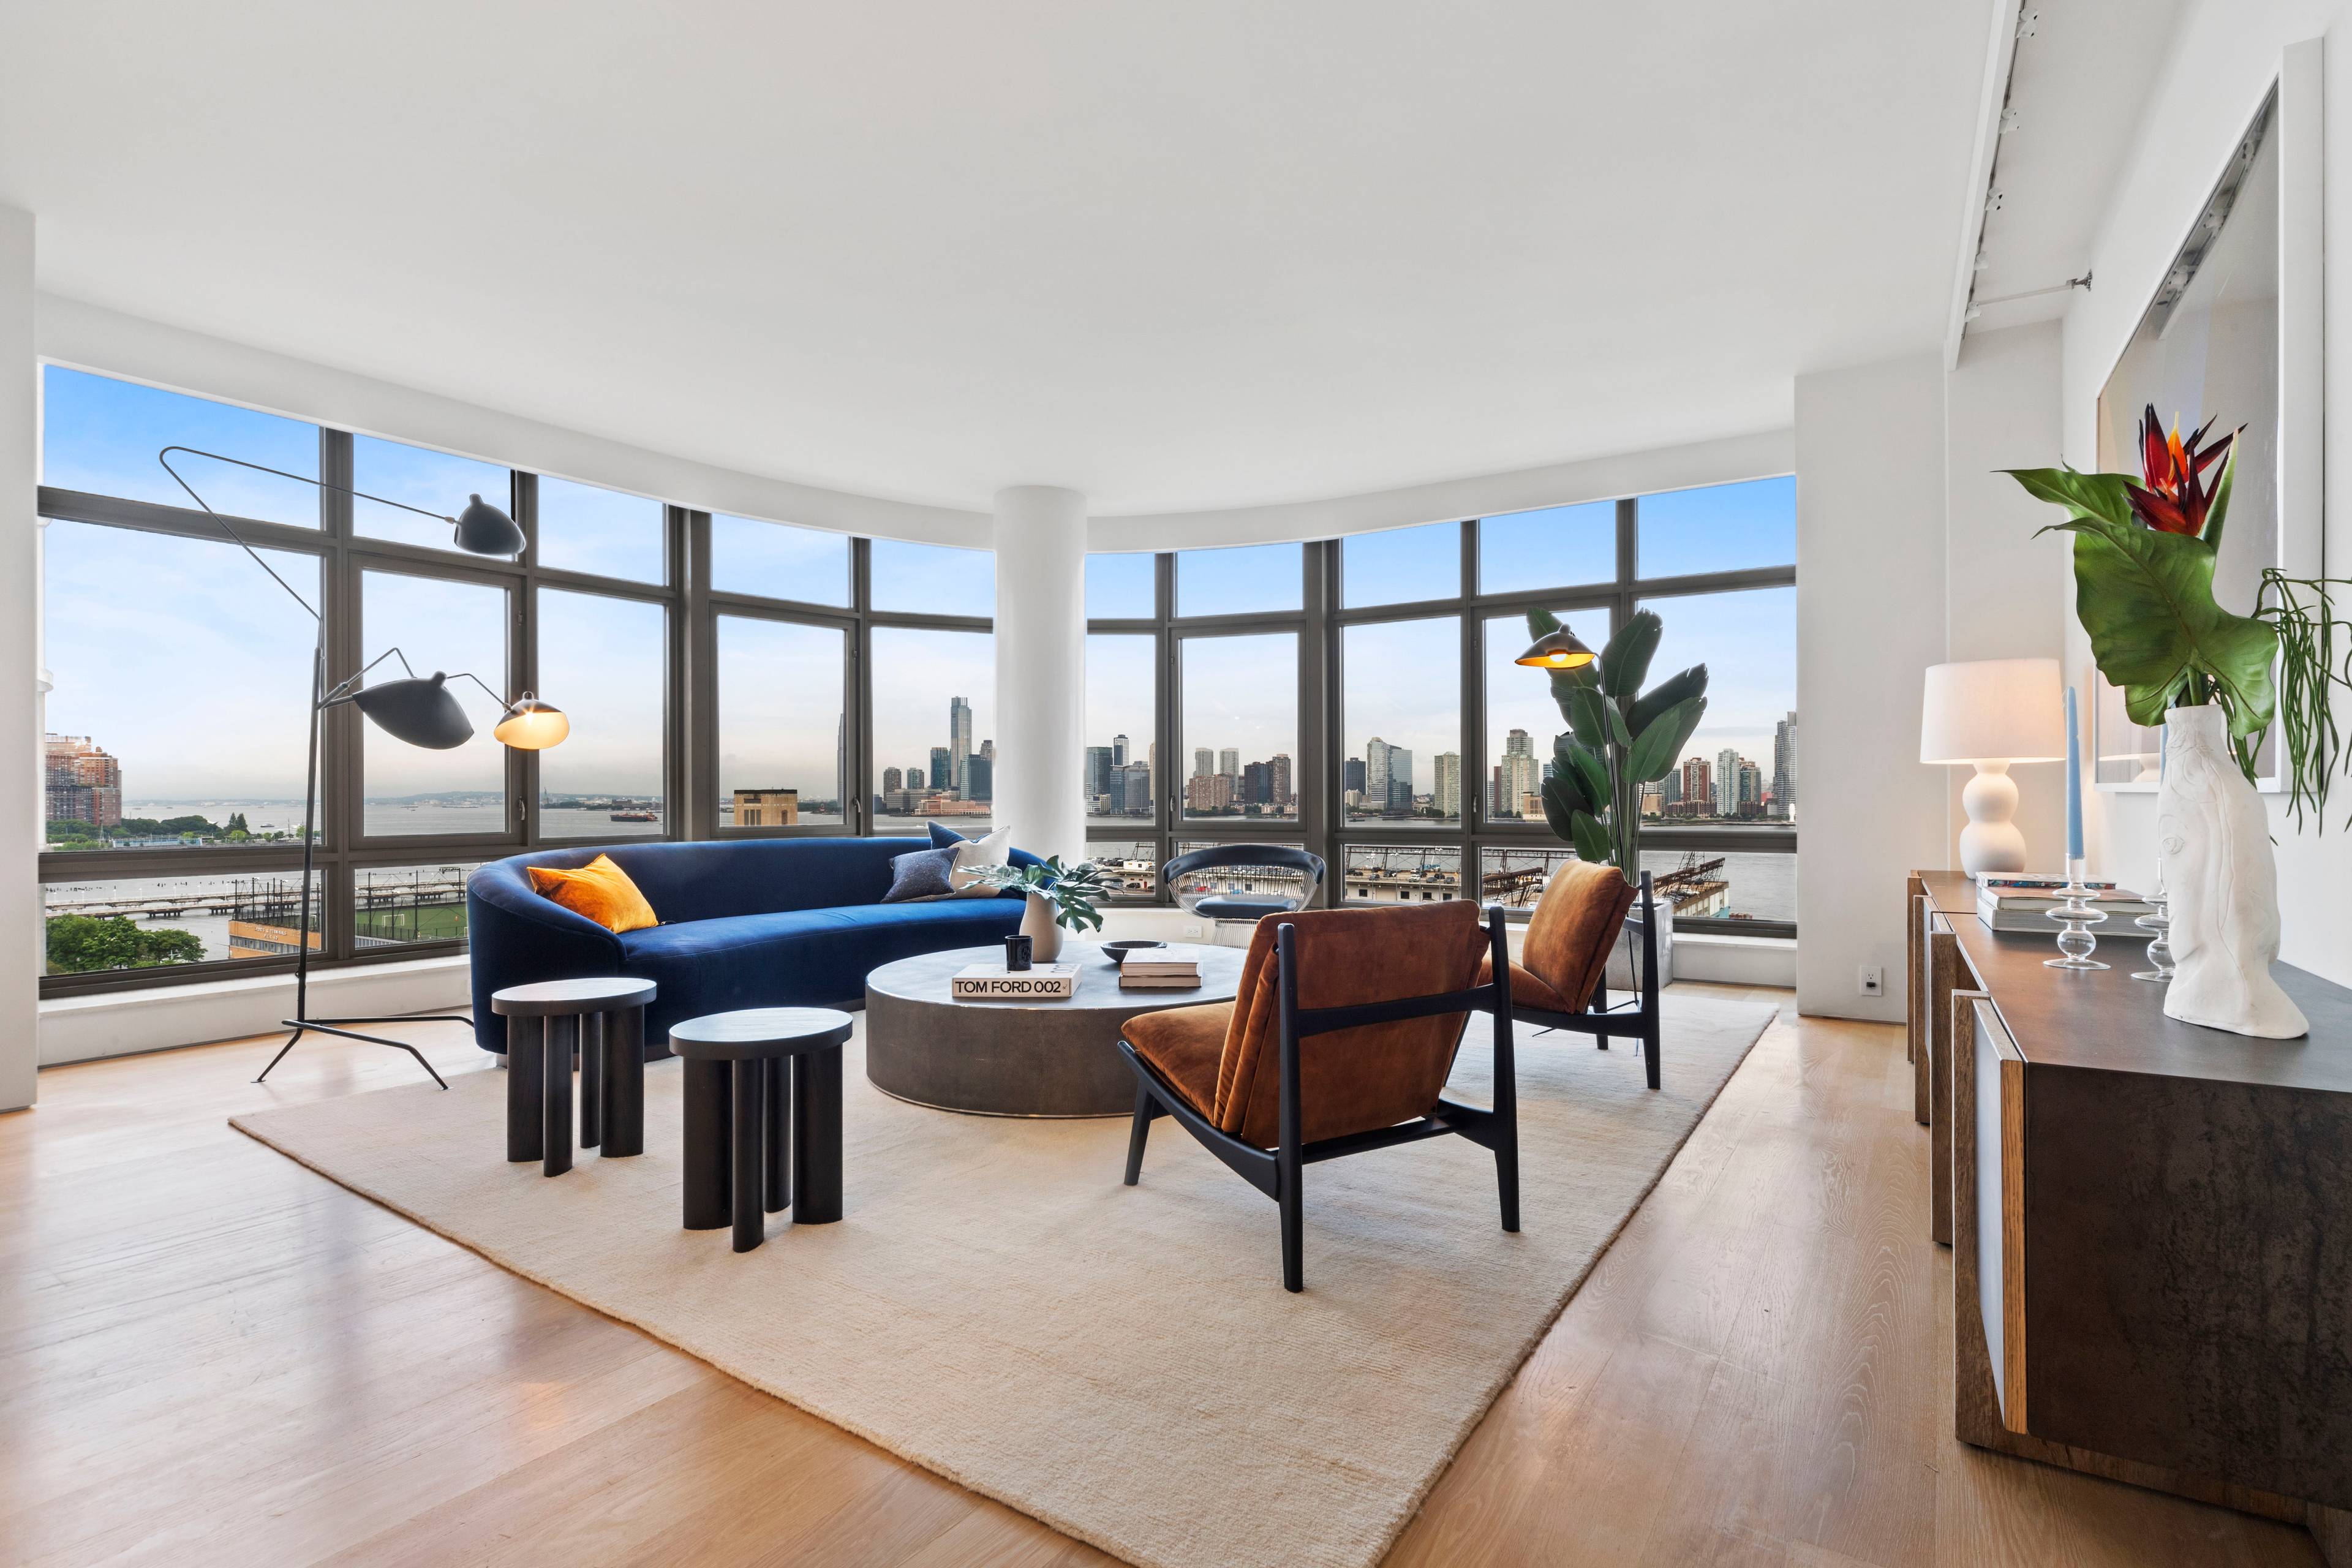 MAGNIFICENT amp ; GRANDLY PROPORTIONED WEST VILLAGE CONDO Enjoy spectacular sunsets, amazing light and Hudson River views throughout from this magnificent, gut renovated 2400 sq ft corner apartment.